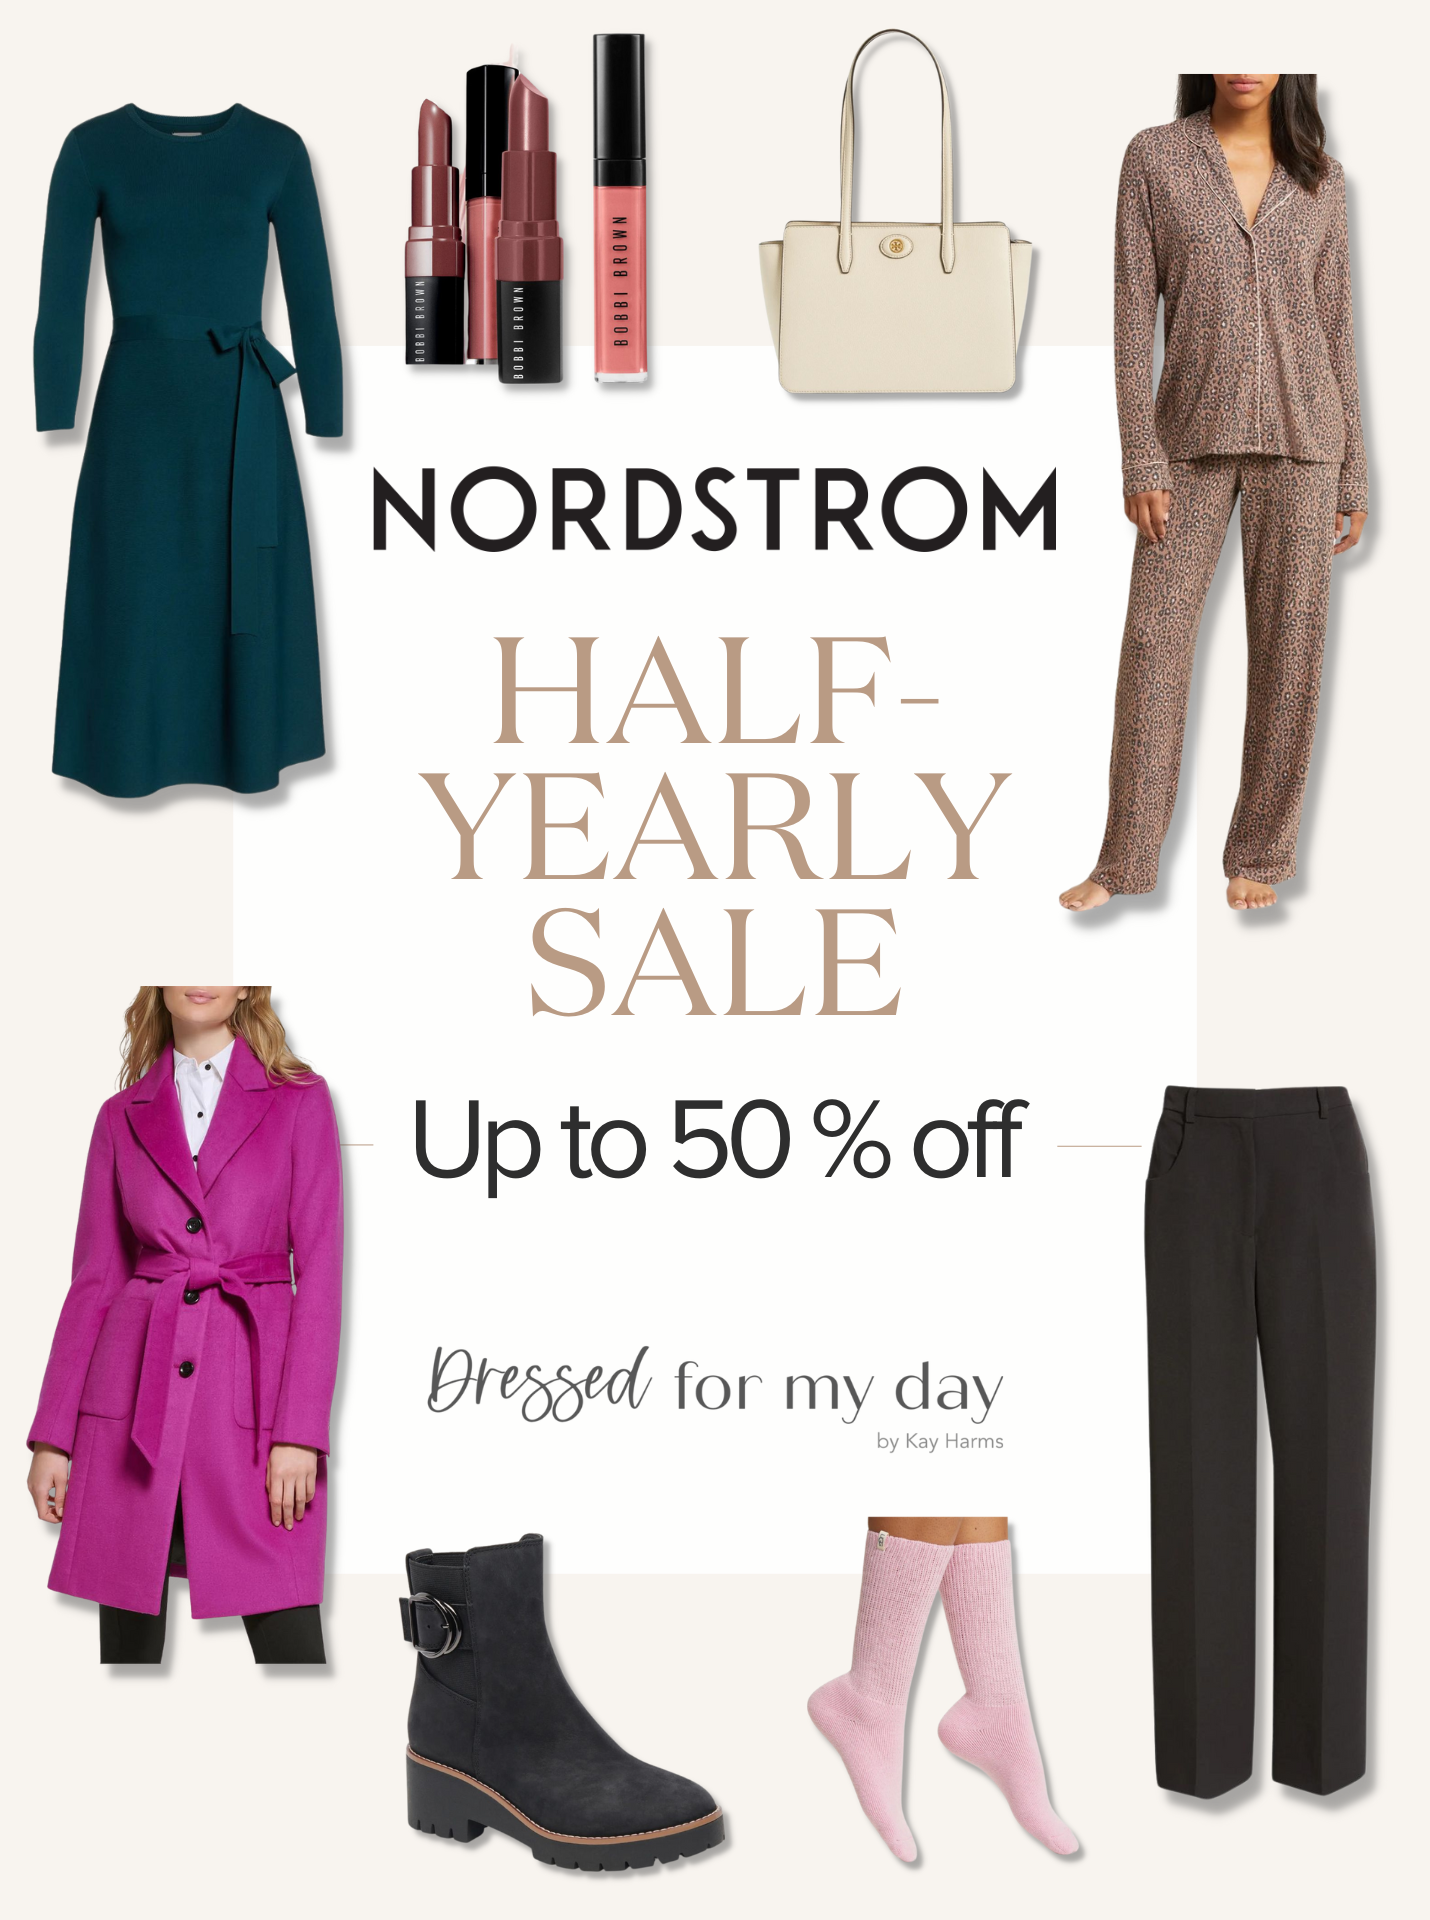 Nordstrom HalfYearly Sale Dressed for My Day